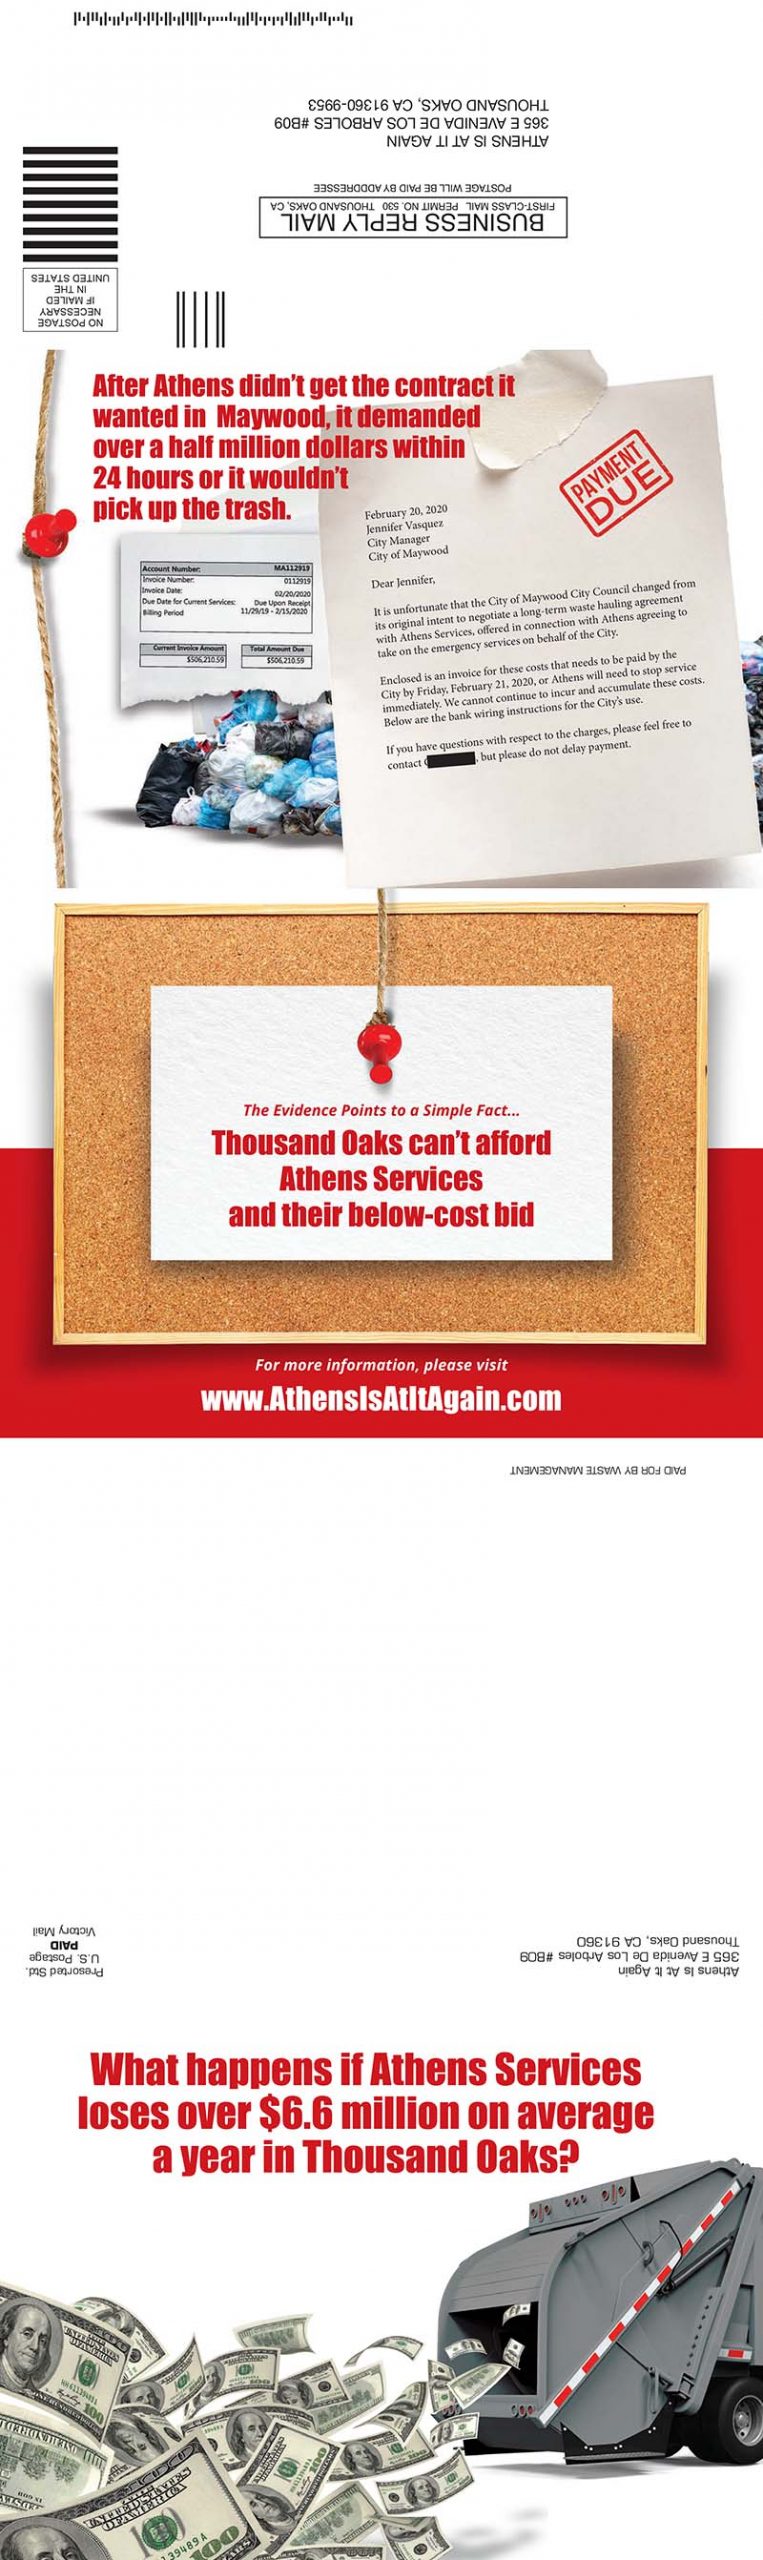 Direct mail piece covering Athens Services' polices and rate hikes